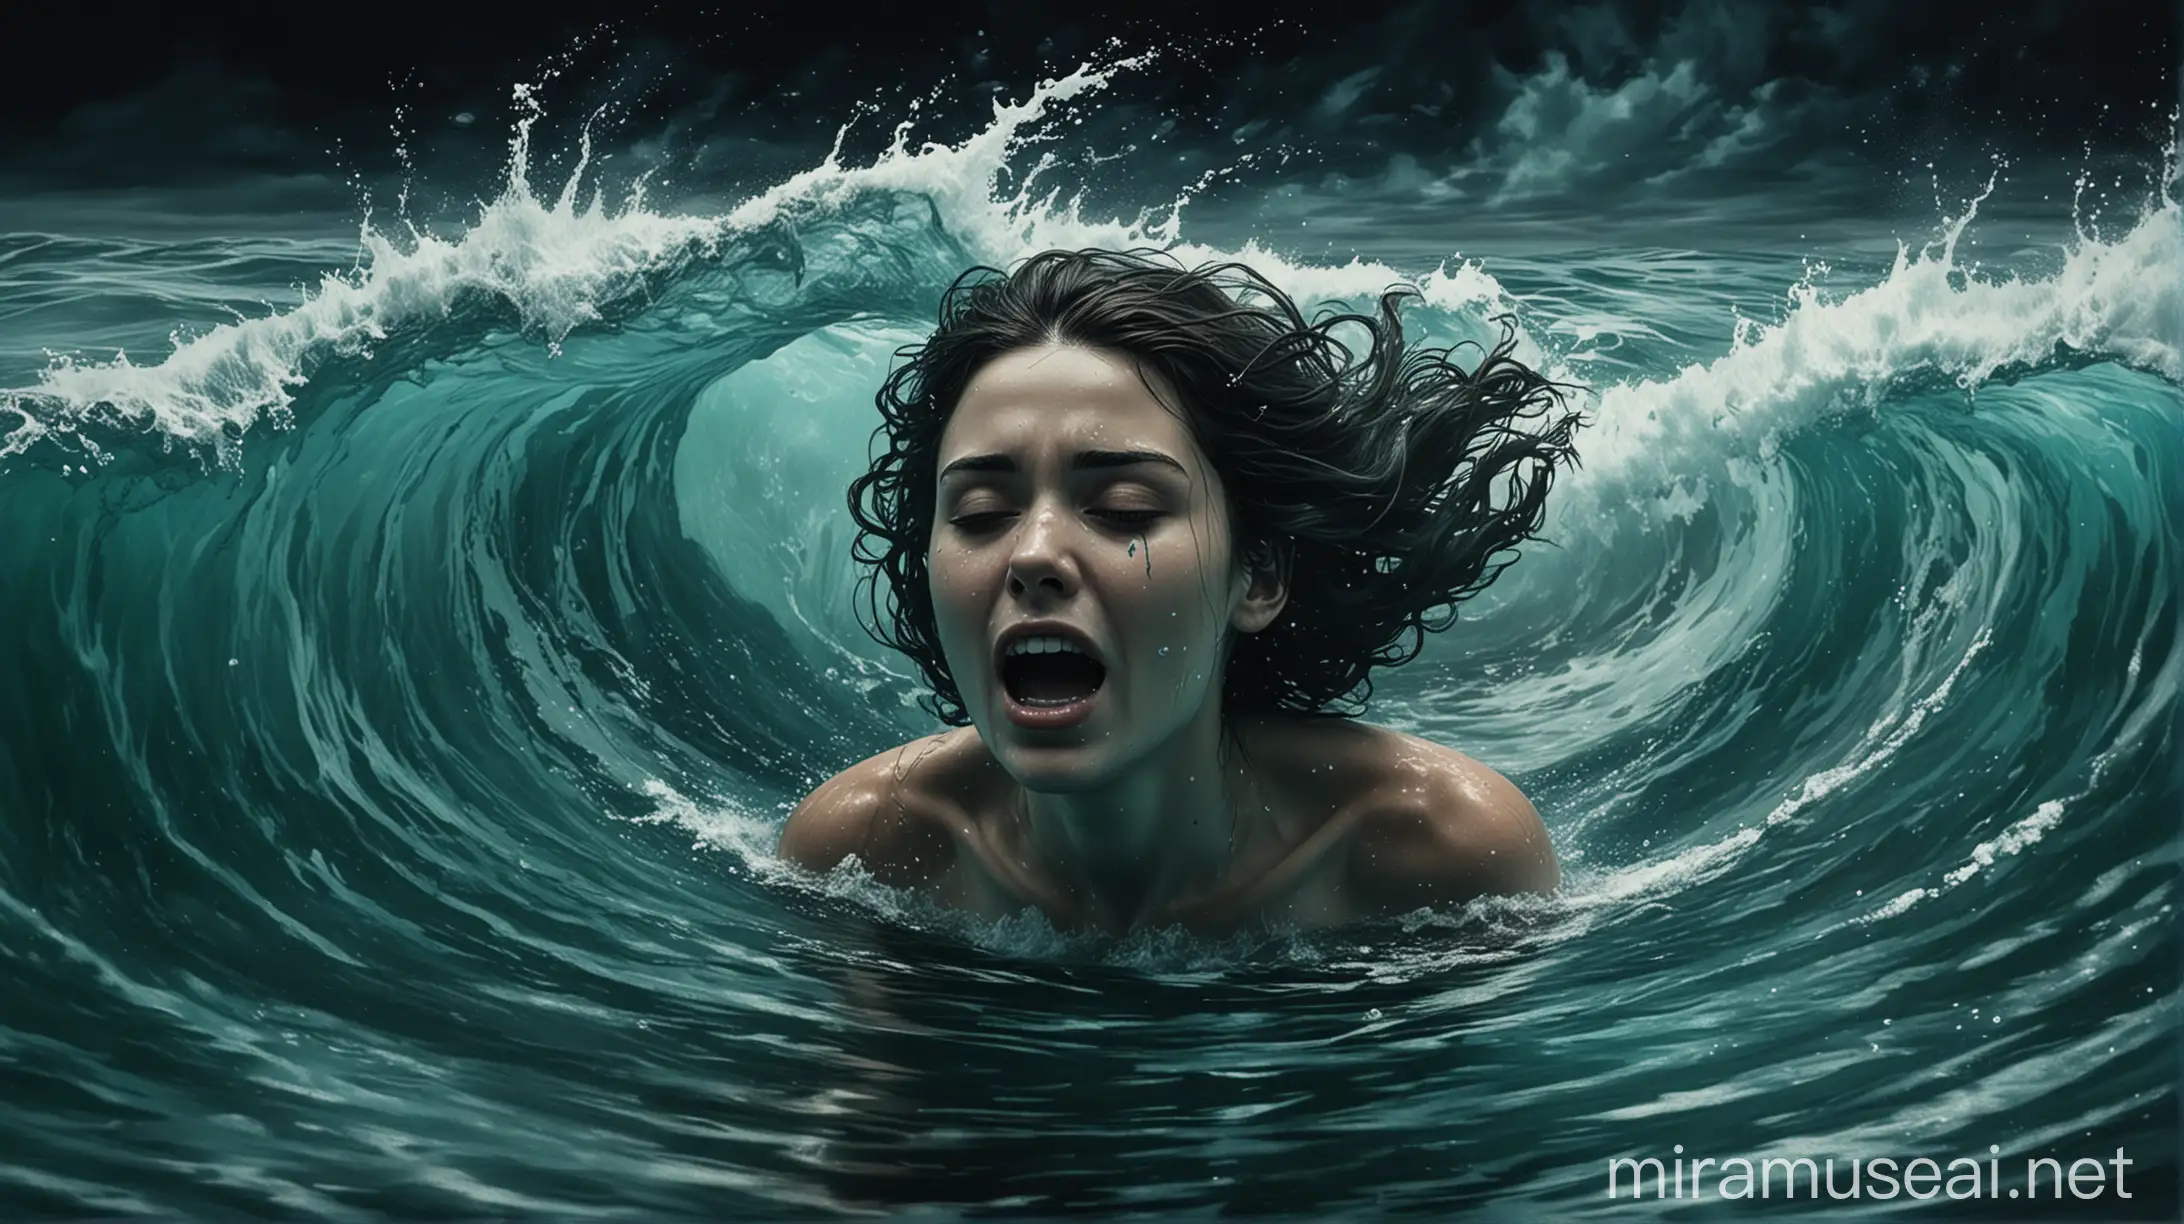 Woman Sinking in Turbulent Teal Depths of Betrayal and Loss